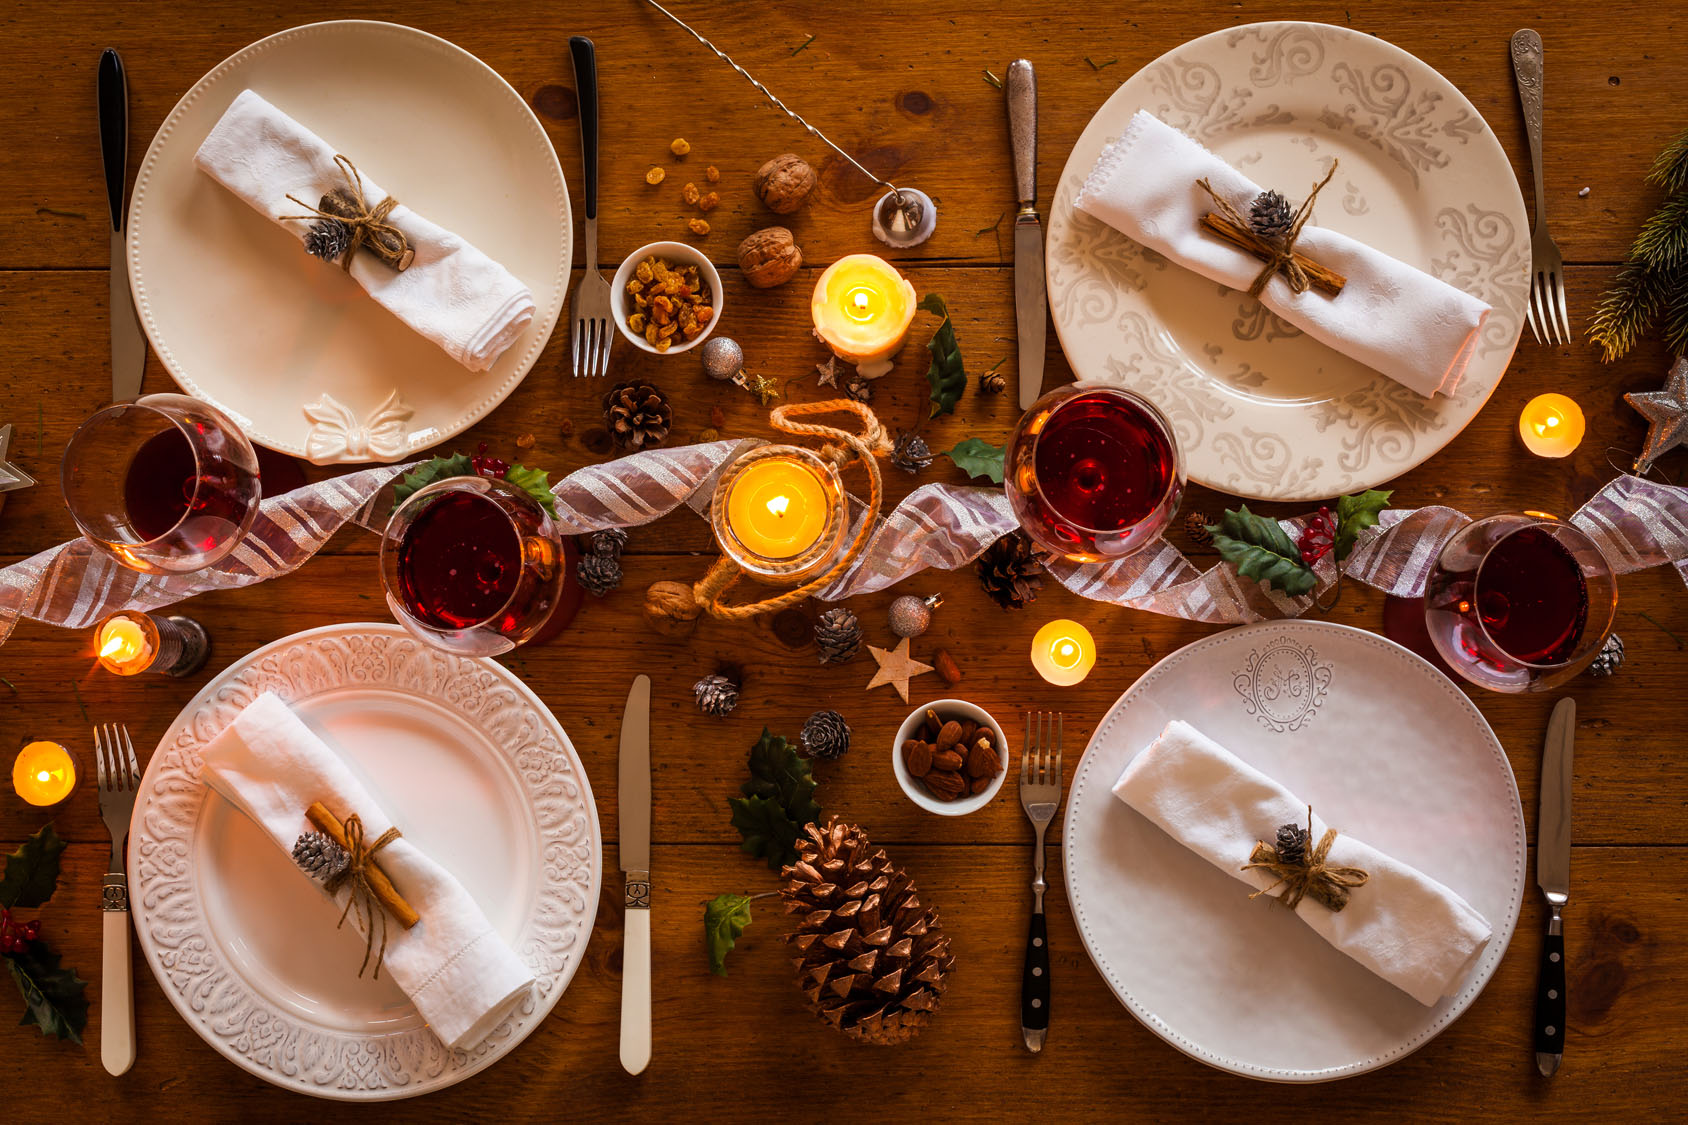 Christmas table setting for family dinner at a cosy rustic table with candles and decorations. Top view.